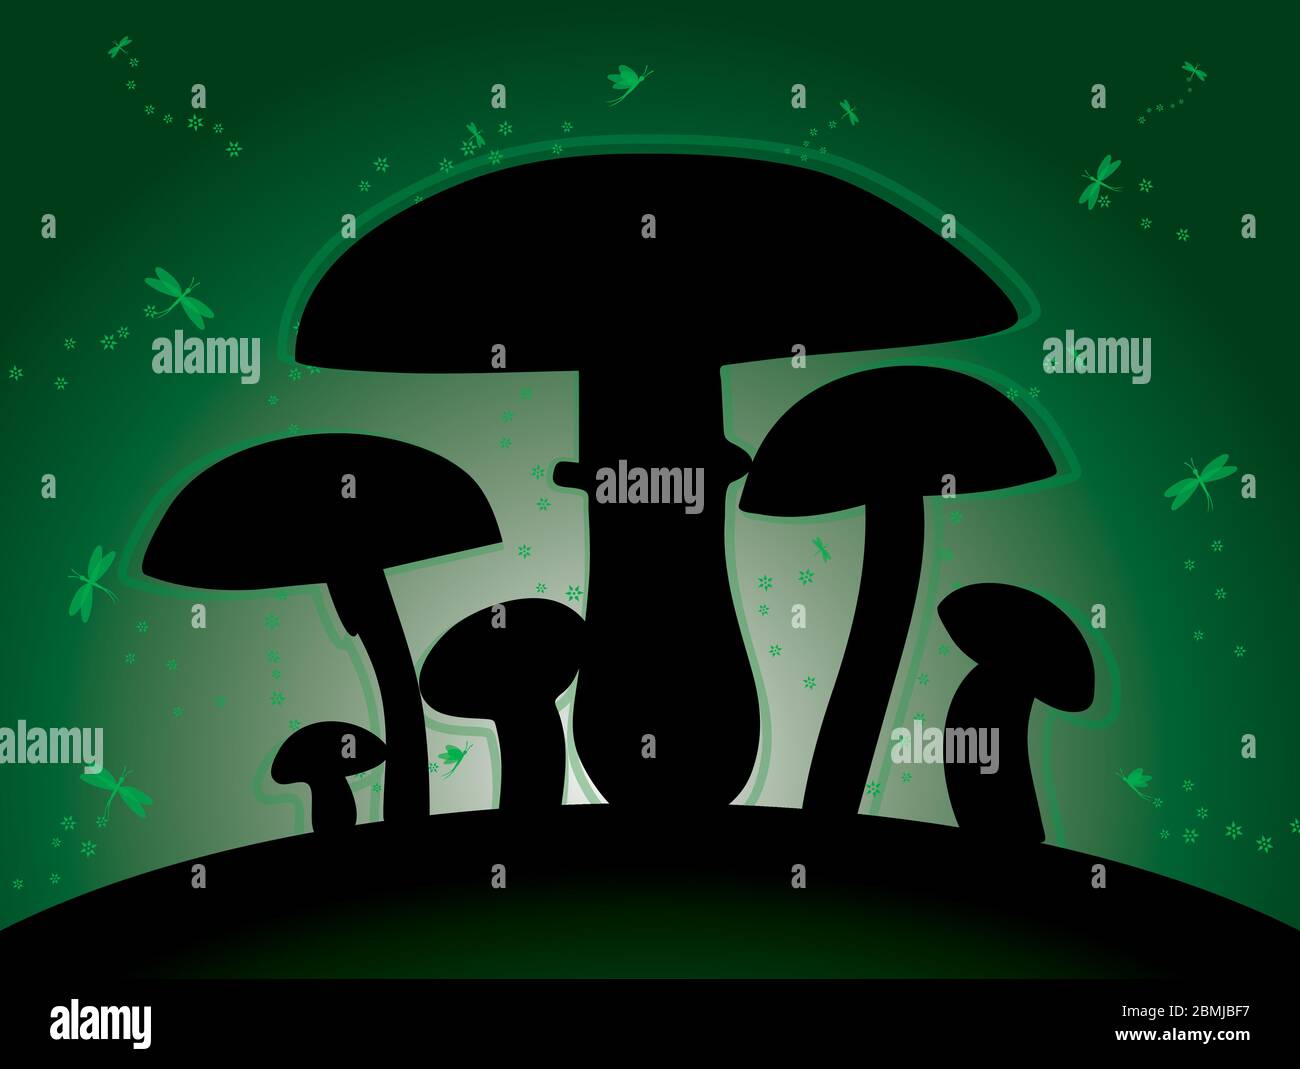 glowing mushrooms silhouette vector at night forest Stock Vector